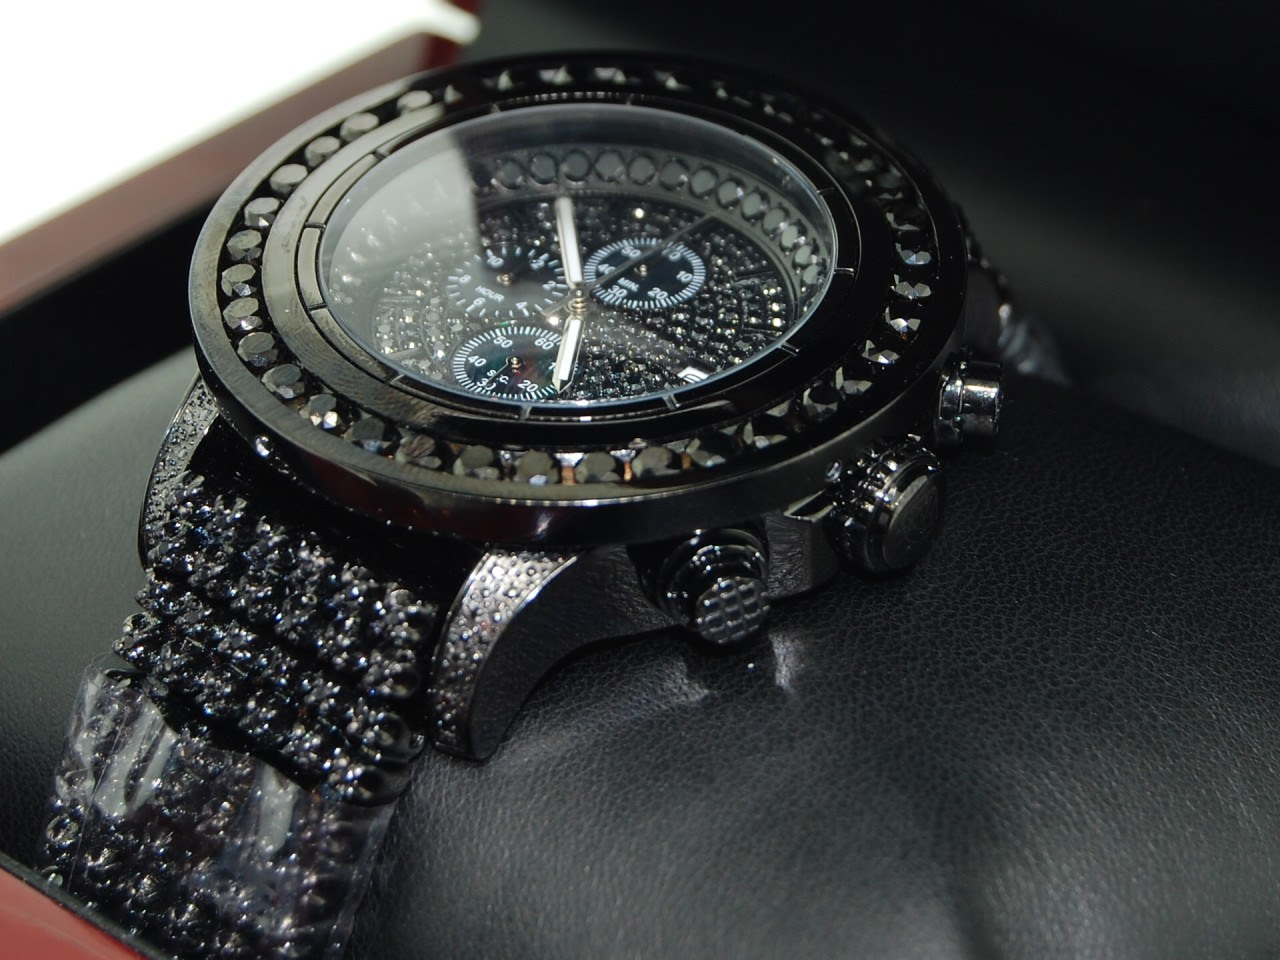 Details about 10CT MENS ICE TIME BLACK DIAMOND CHRONOGRAPH WATCH